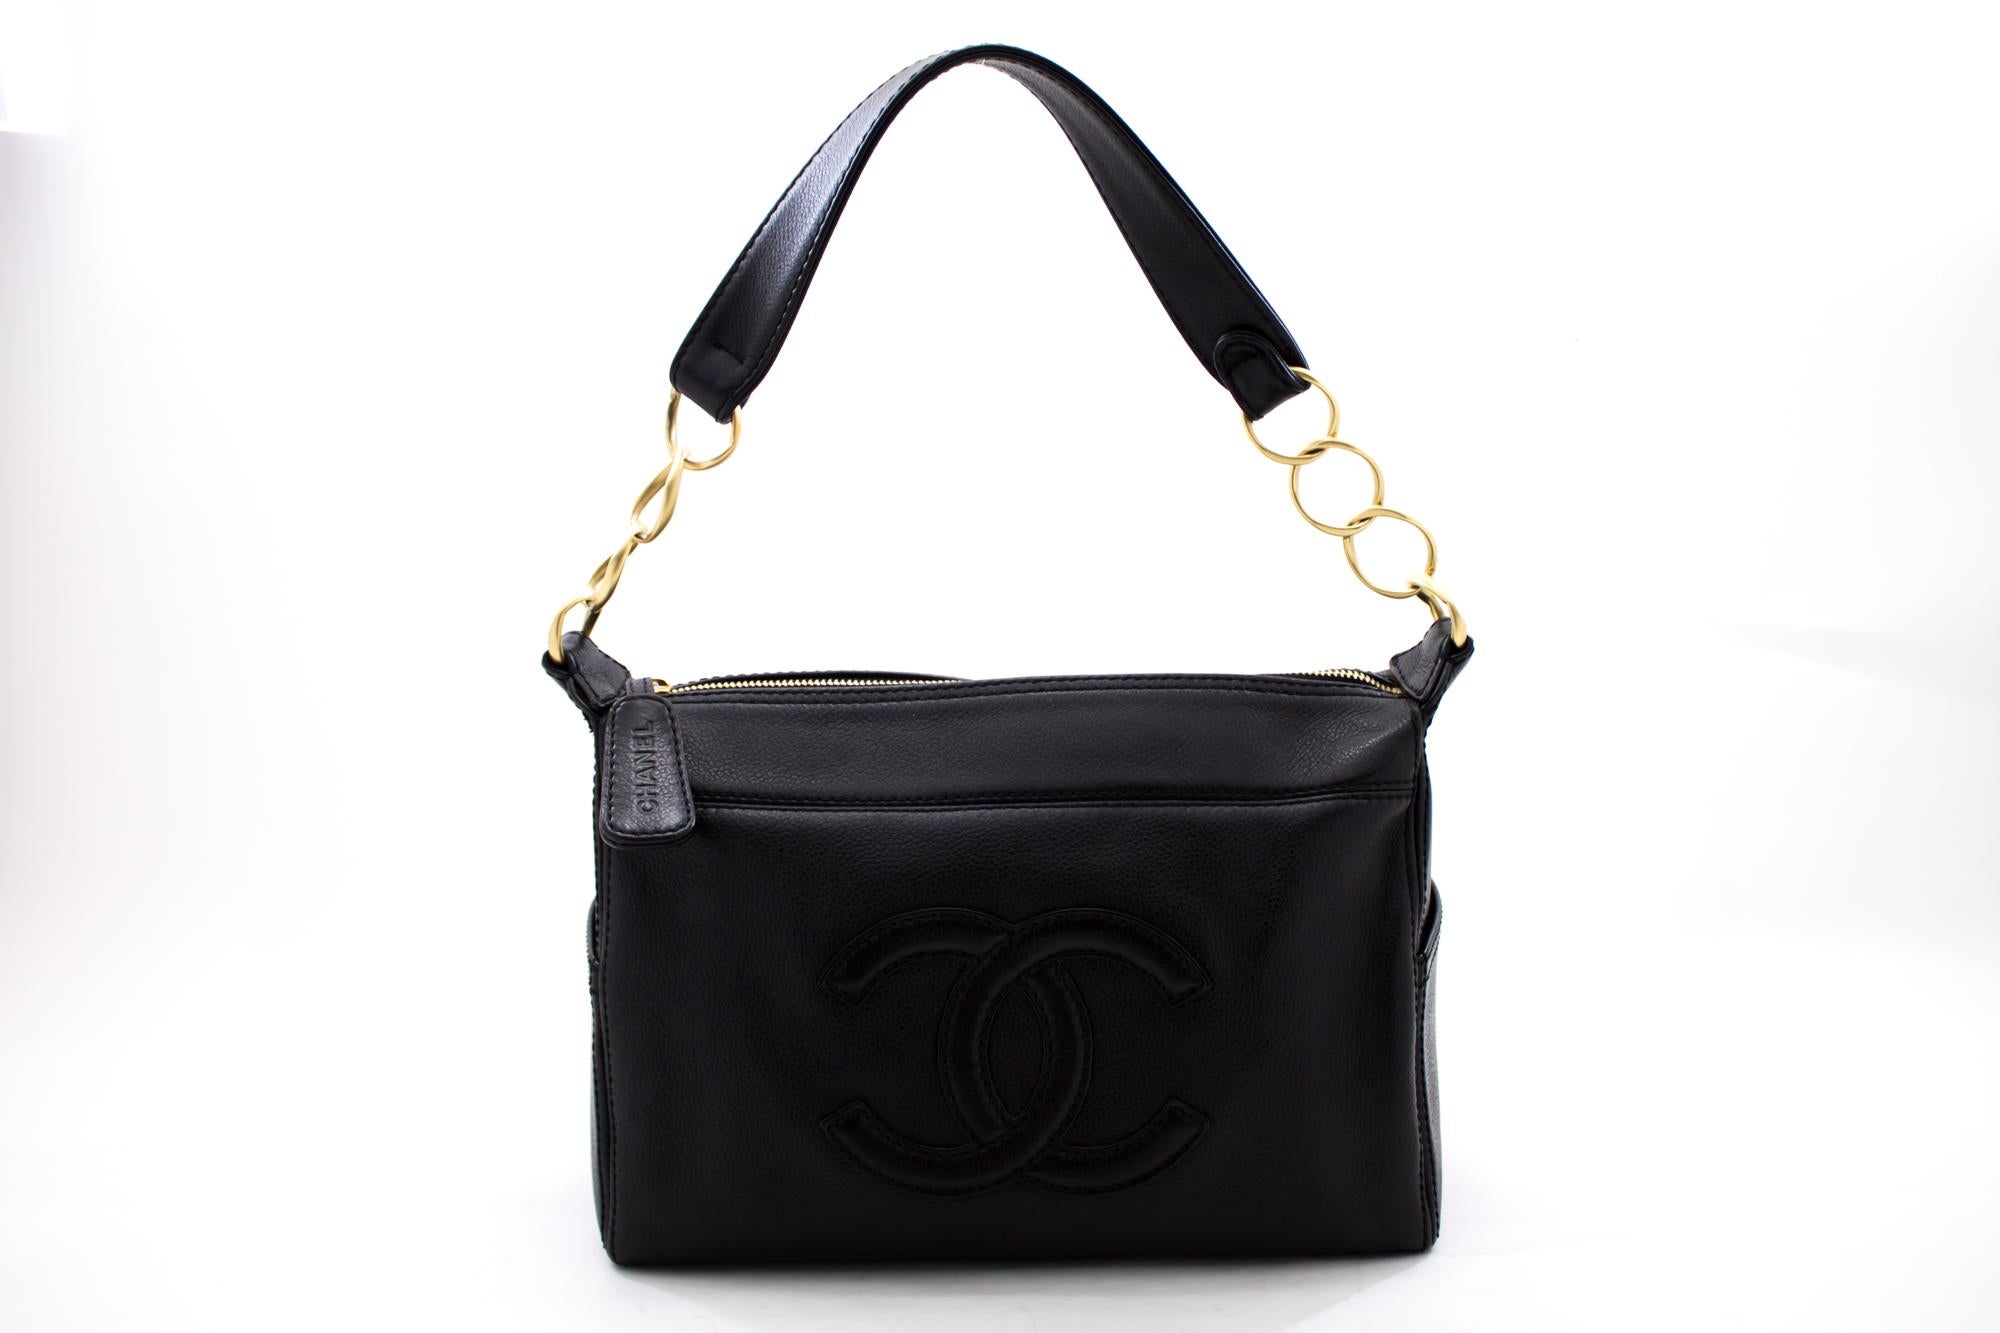 An authentic CHANEL Soft Caviar Chain Shoulder Bag Black Leather Zipper. The color is Black. The outside material is Leather. The pattern is Solid. This item is Contemporary. The year of manufacture would be 2003.
Conditions & Ratings
Outside